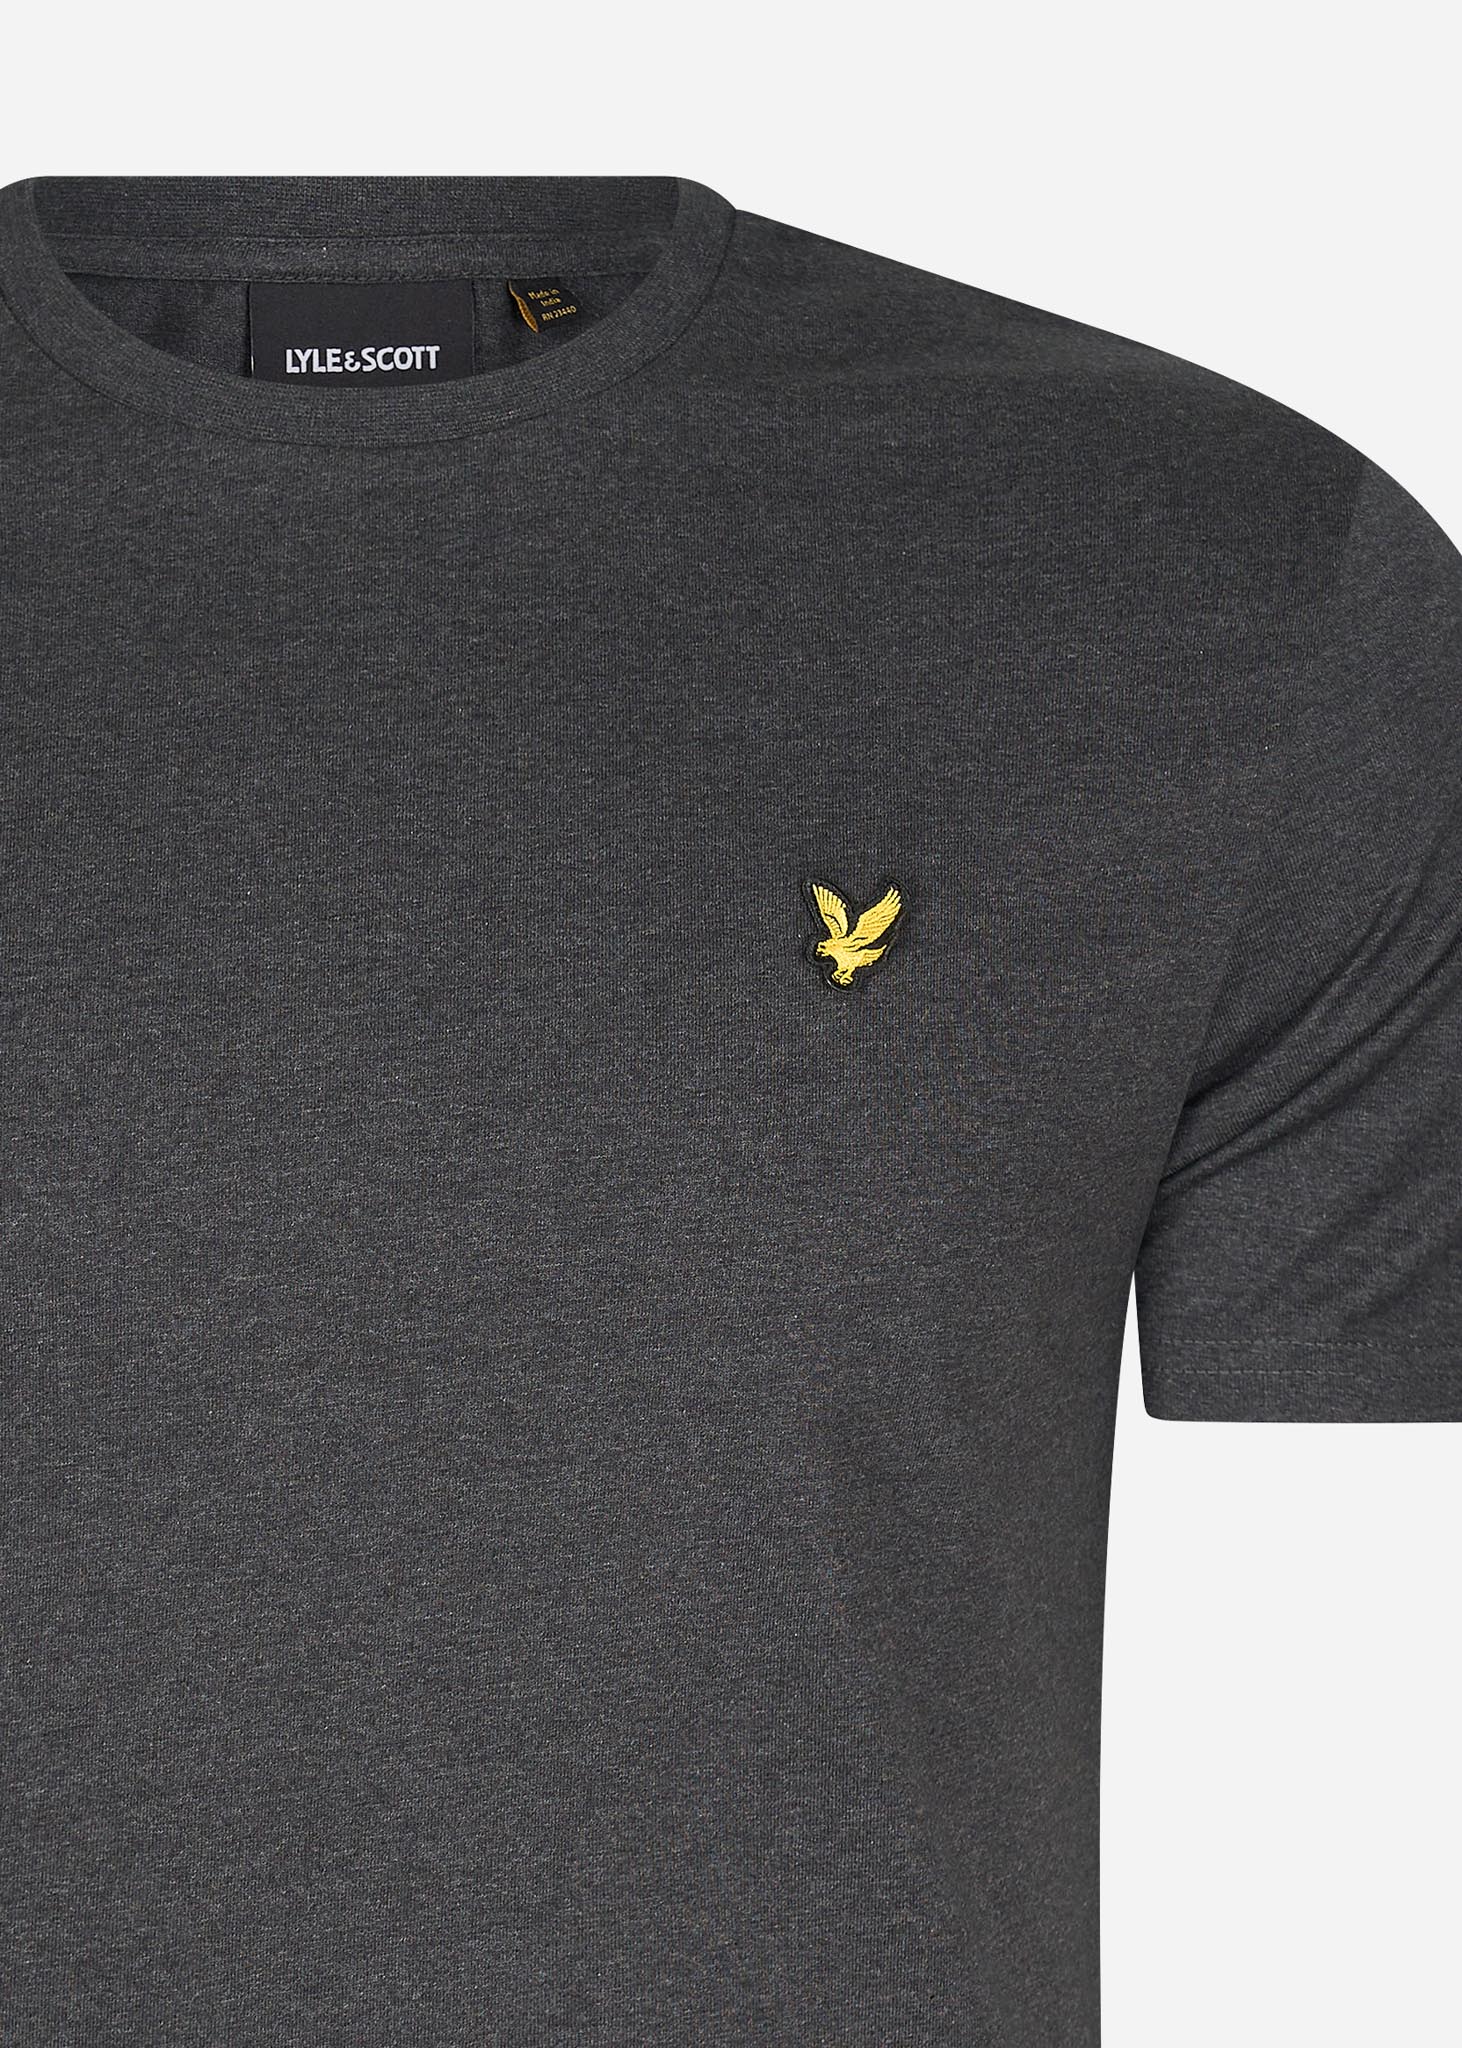 lyle and scott t-shirt charcoal marl donker grijs